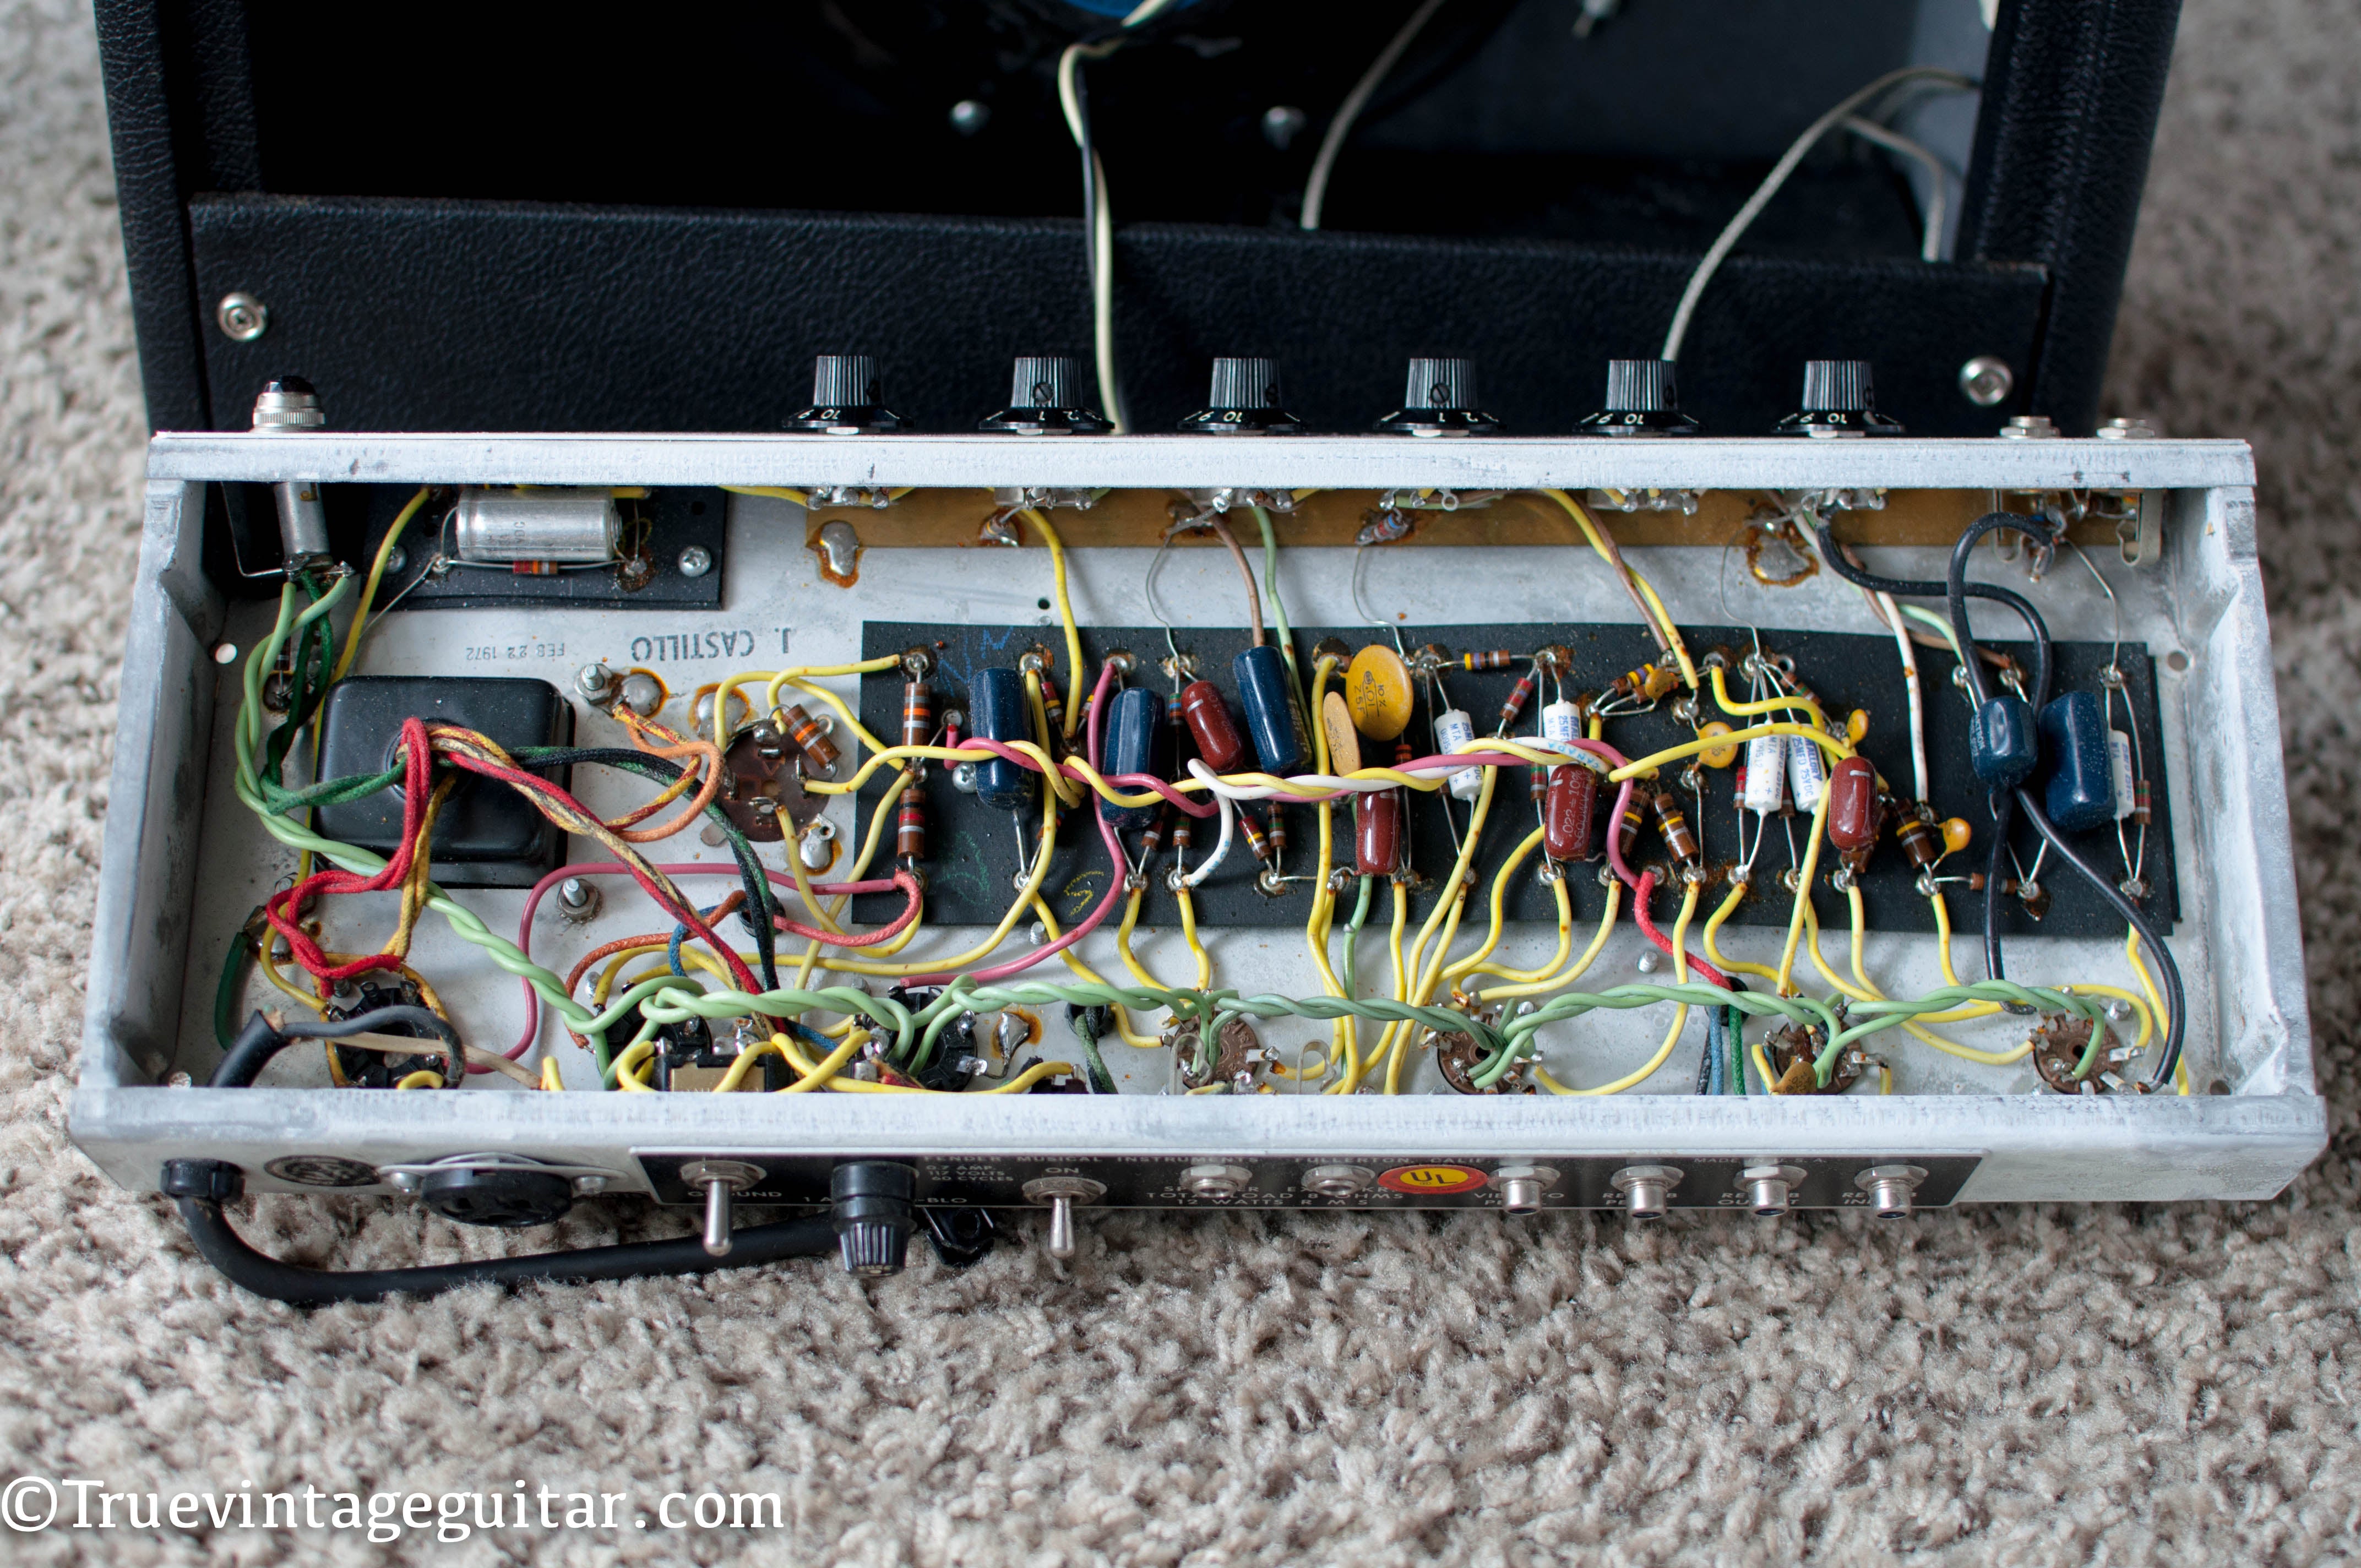 Chassis, circuit board, 1972 Fender Princeton Reverb amp